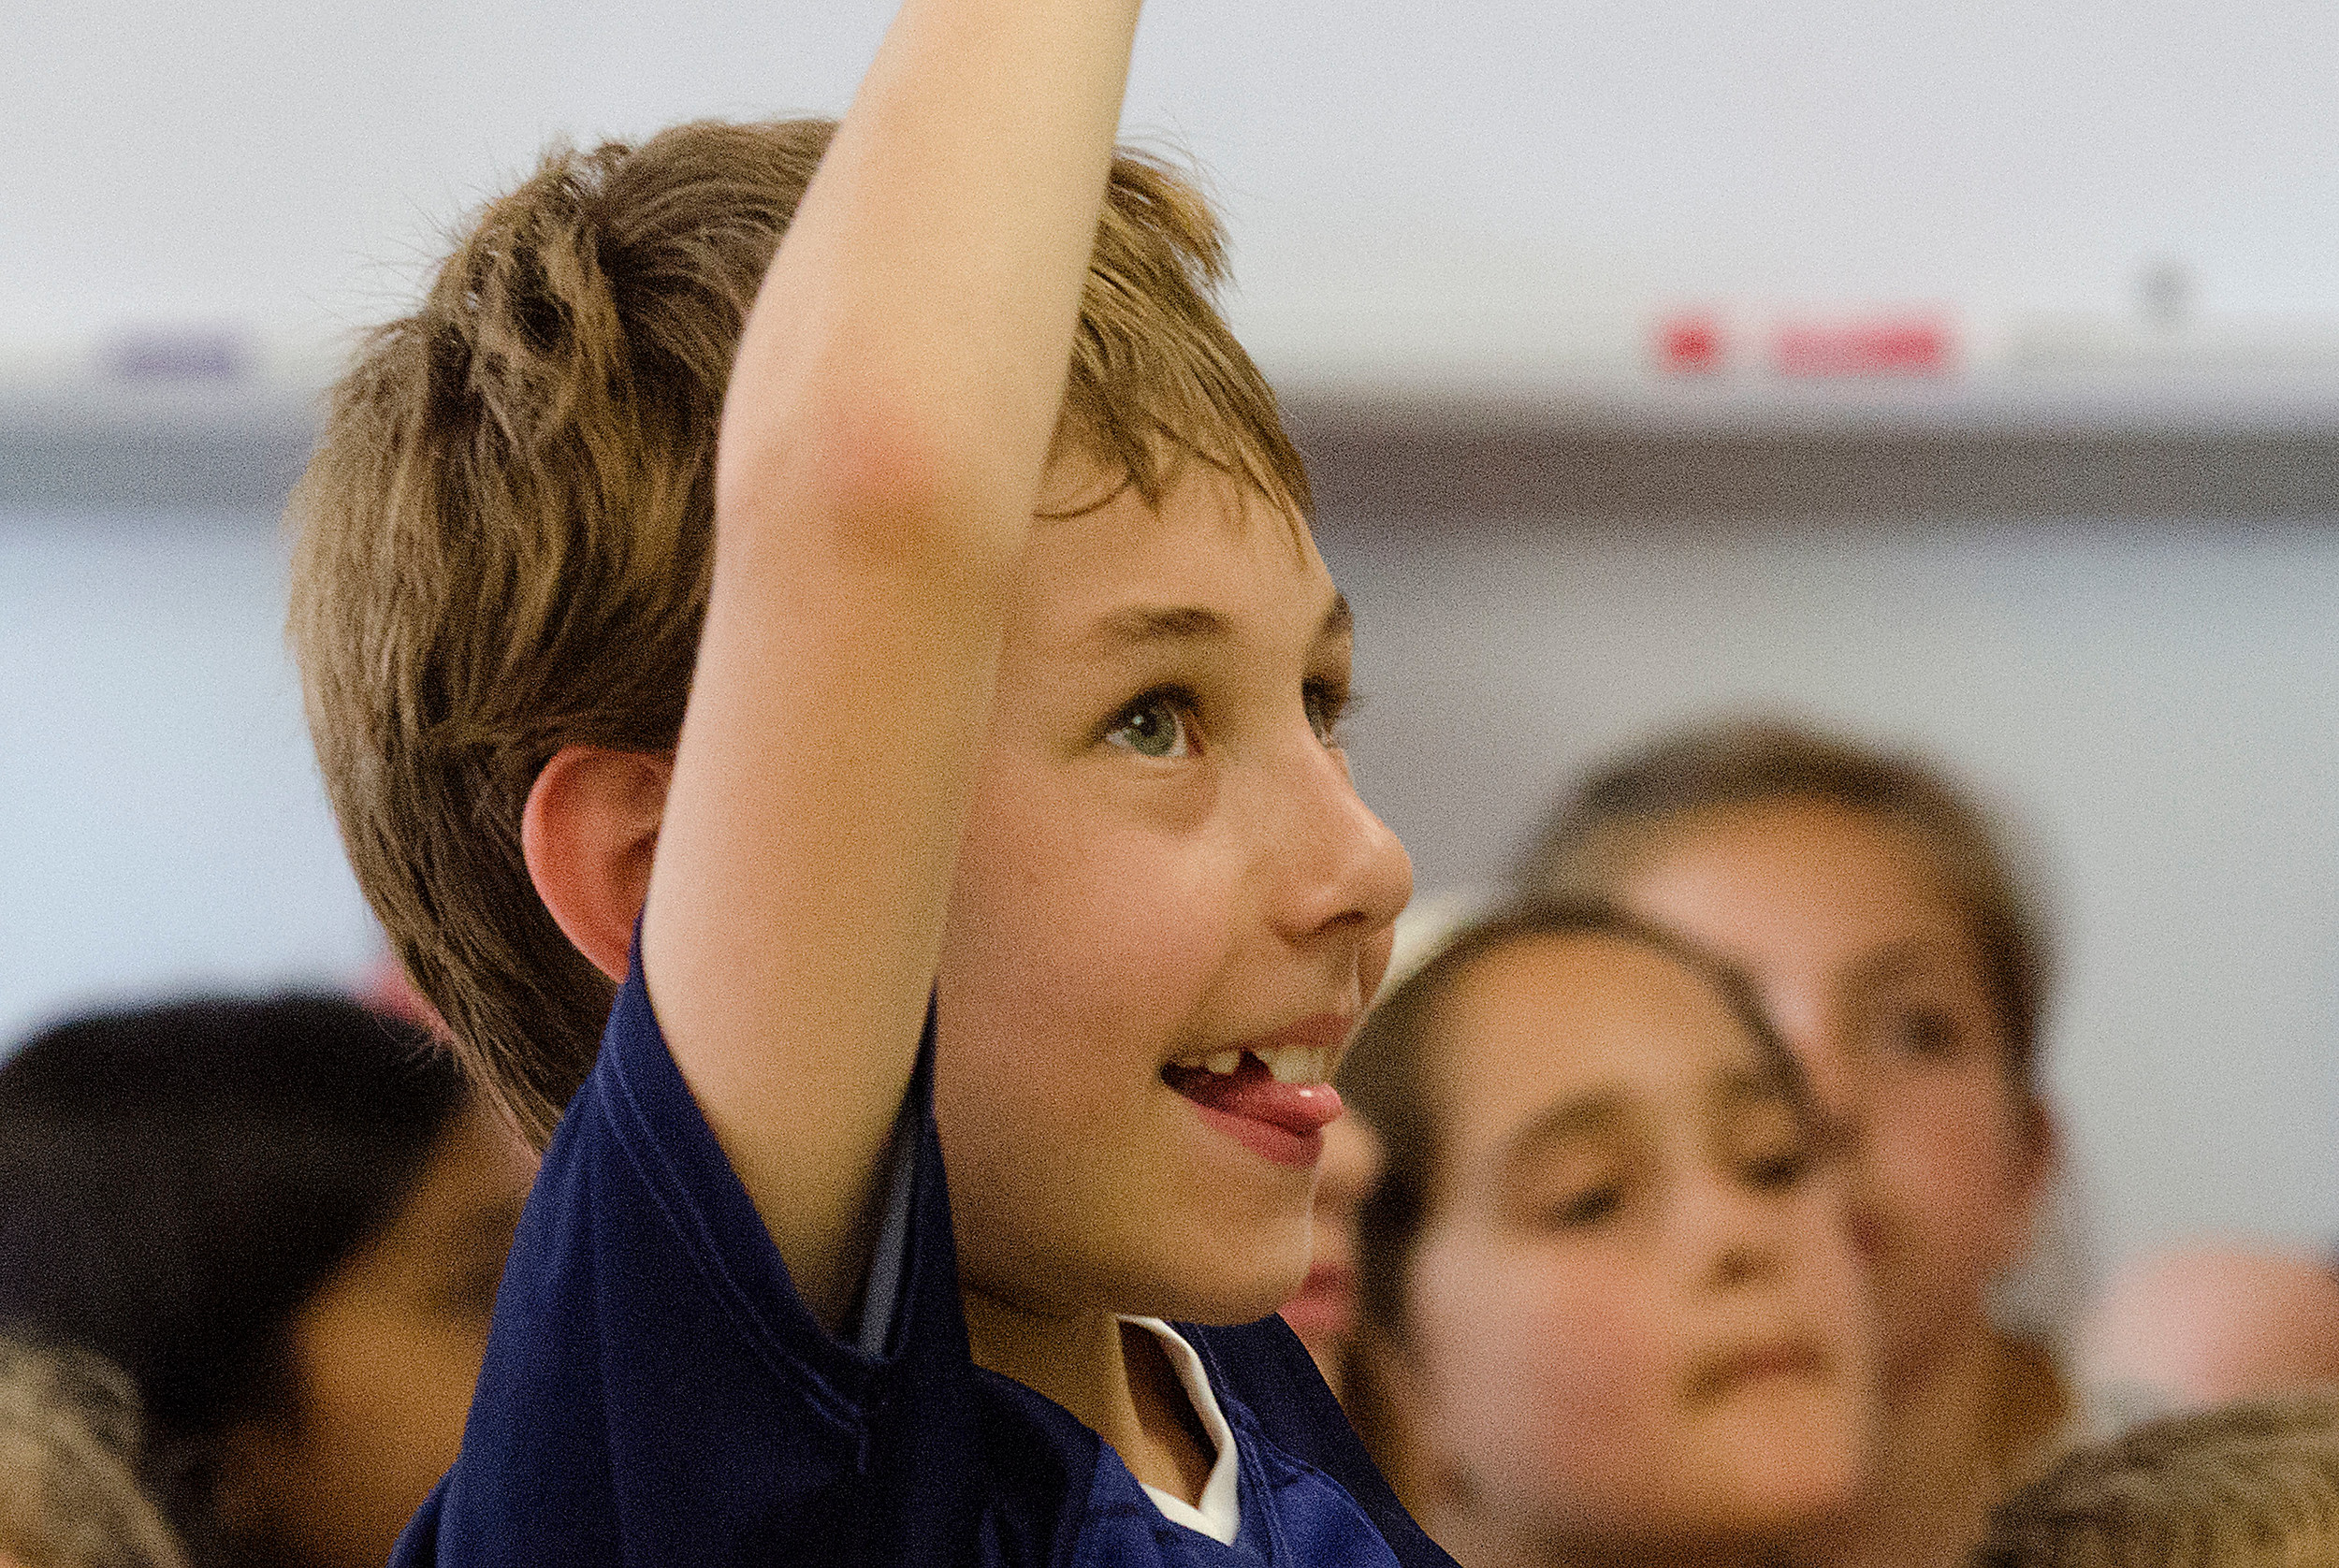 A Sowams School student raises his hand, ready to answer a question posed by BrainStation's Dr. John Stein.